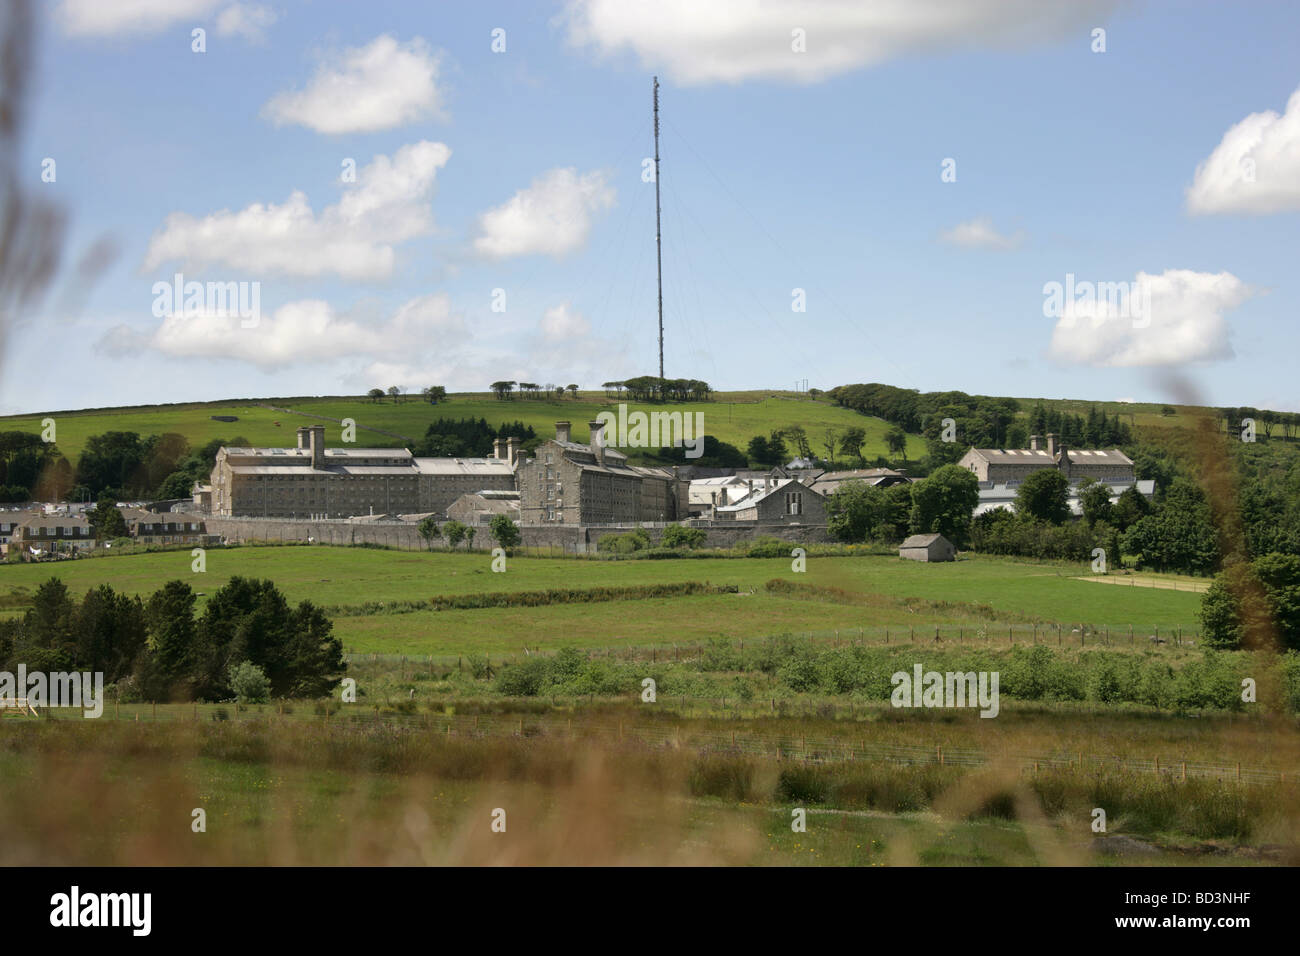 Village of Princetown, England. The early 19th century HM Prison Dartmoor was originally designed by Daniel Asher Alexander. Stock Photo